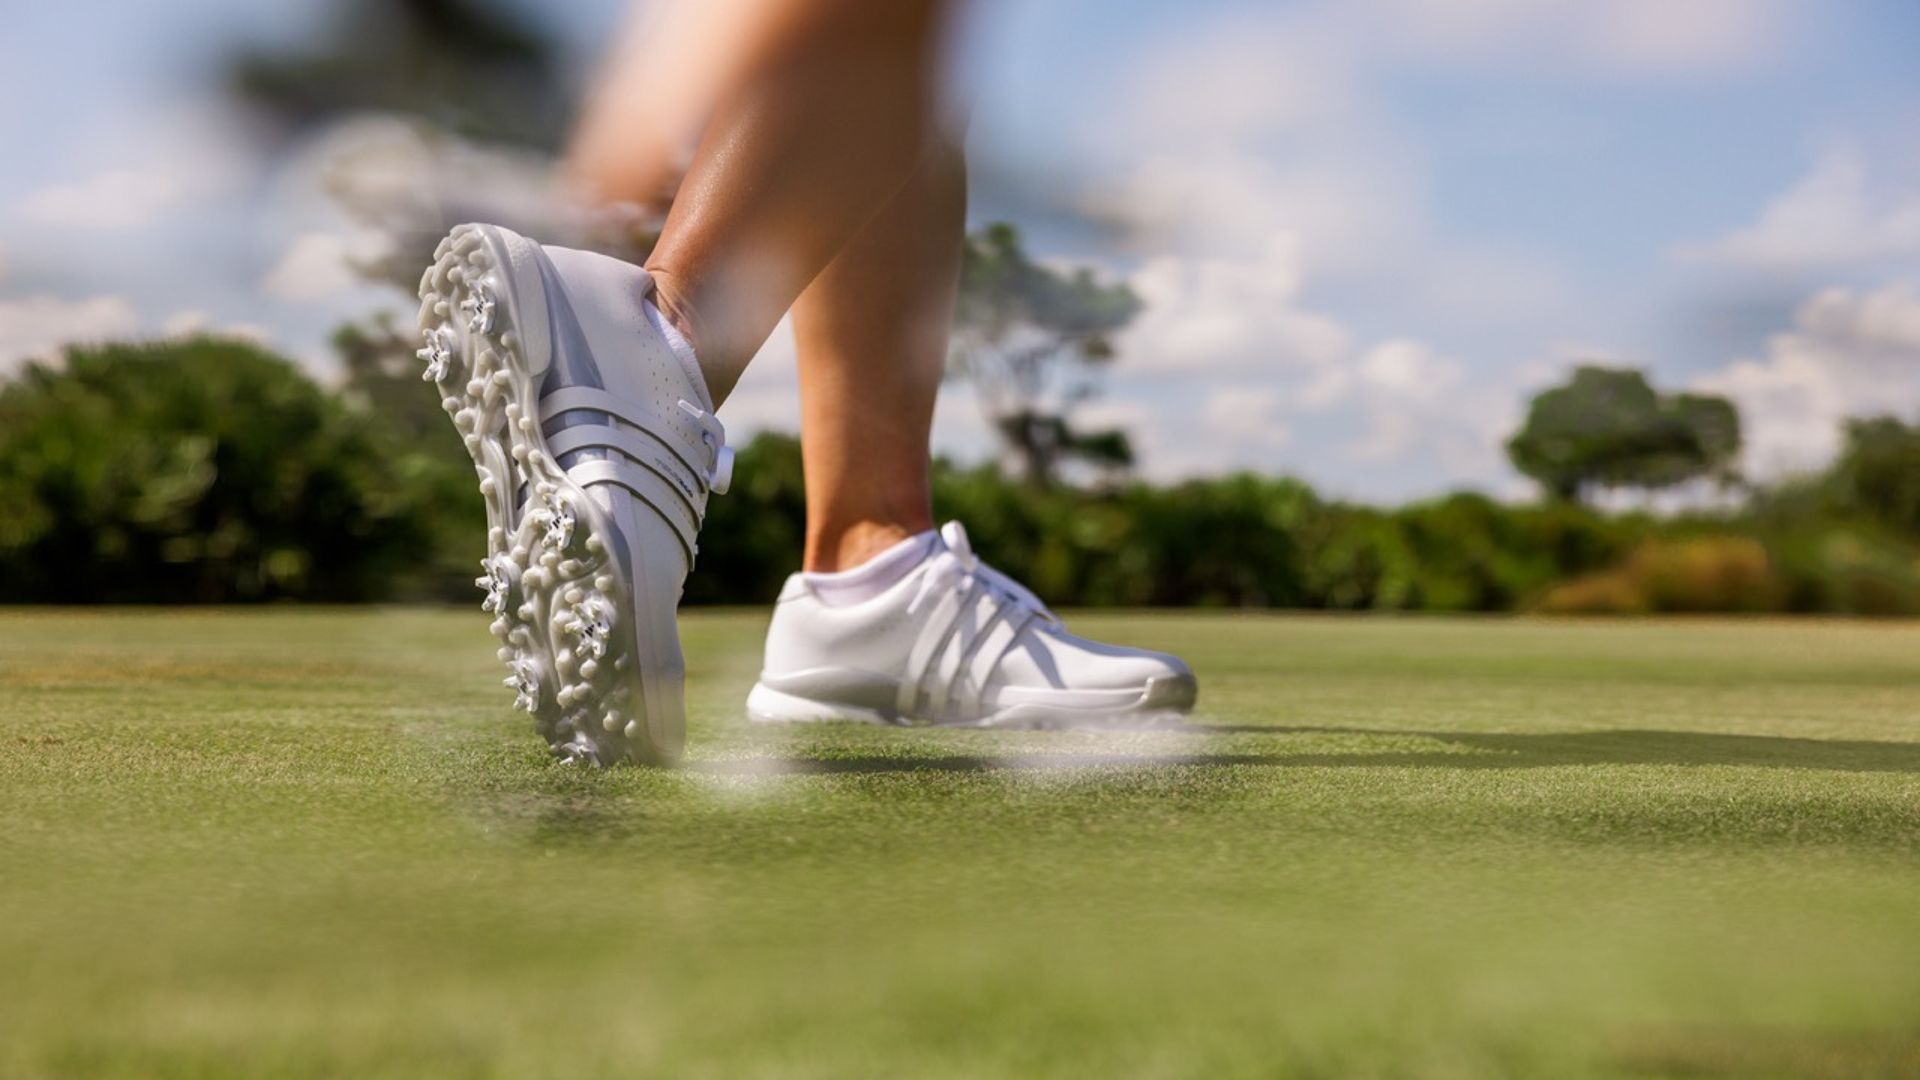 A golf shoe that combines technology and style